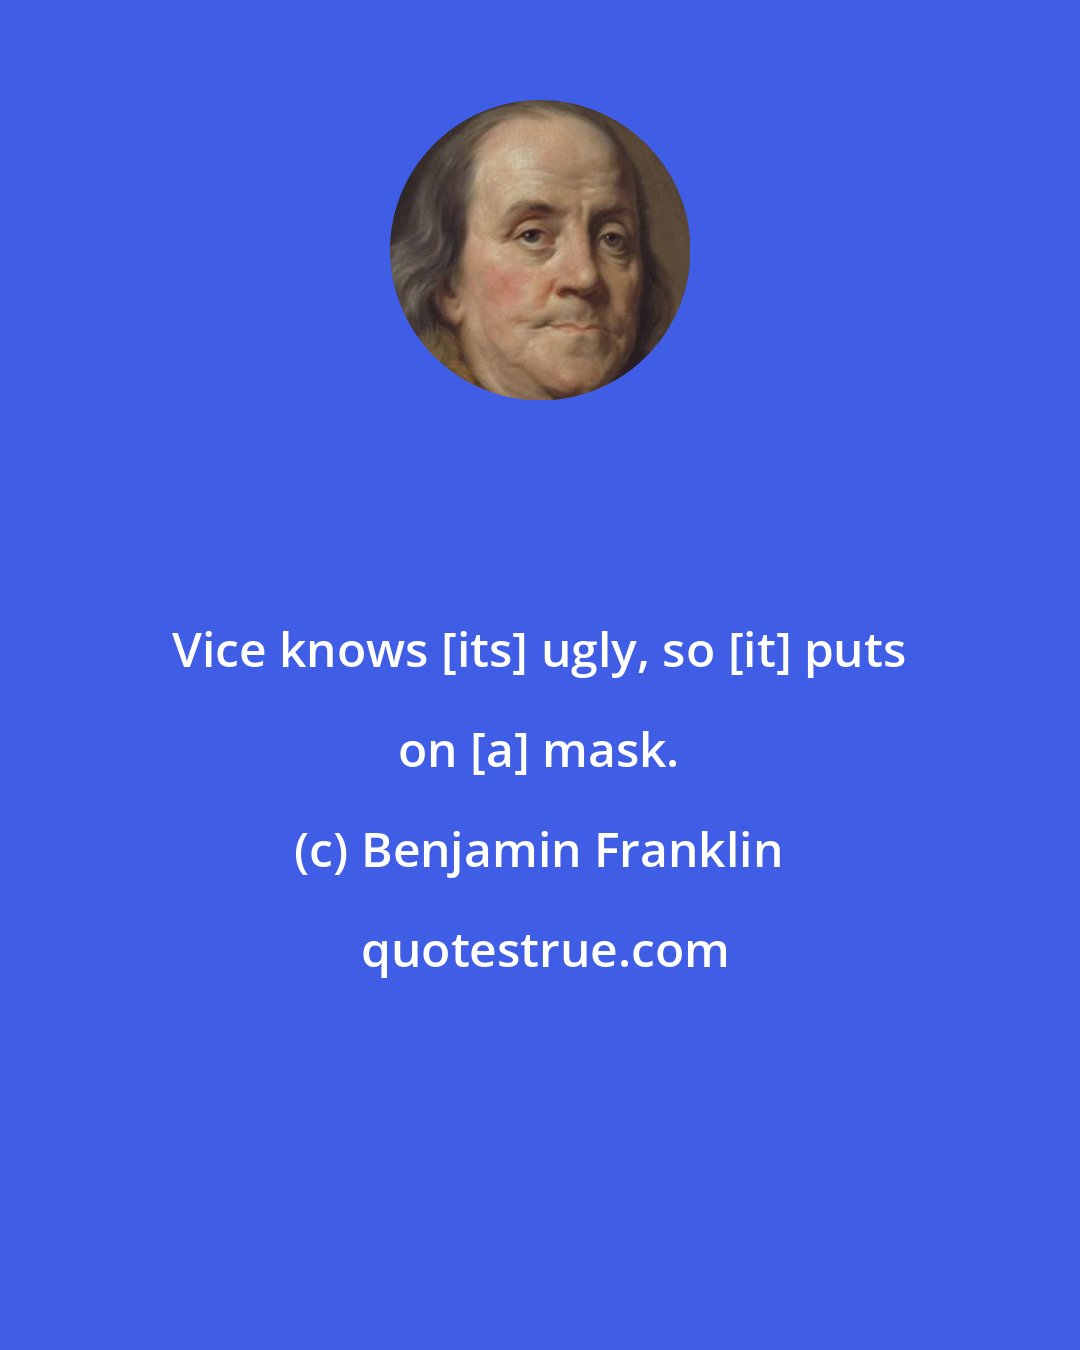 Benjamin Franklin: Vice knows [its] ugly, so [it] puts on [a] mask.